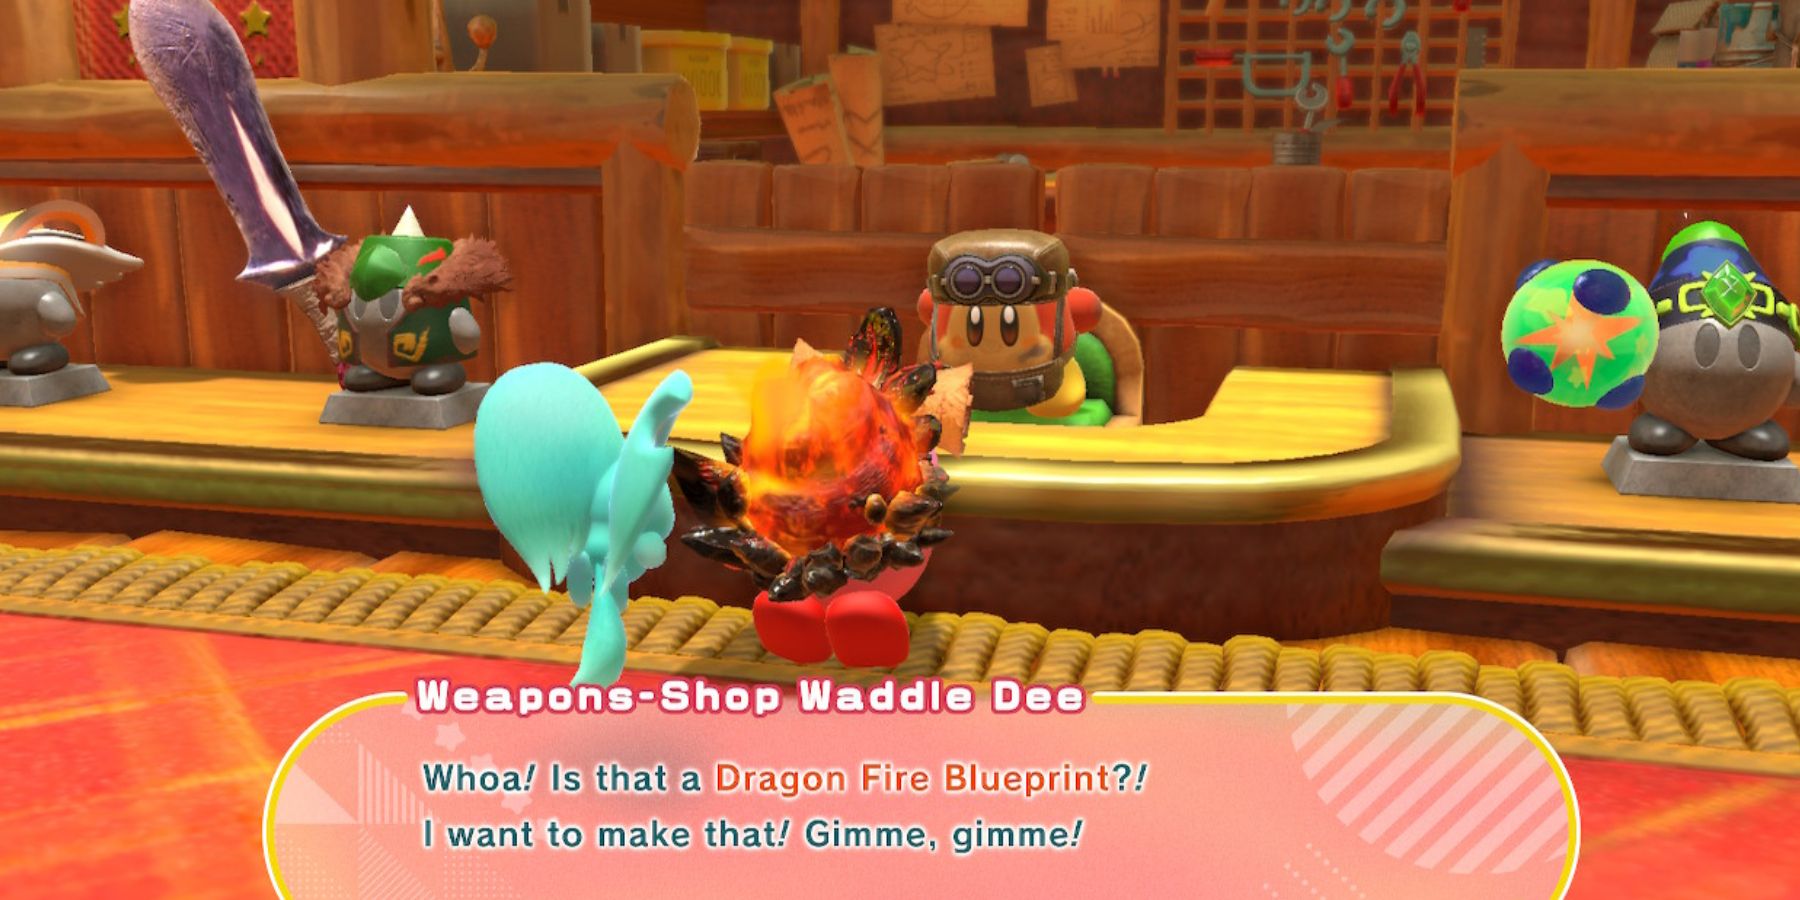 kirby-and-the-forgotten-land-weapons-shop=waddle-dee-wants-blueprint